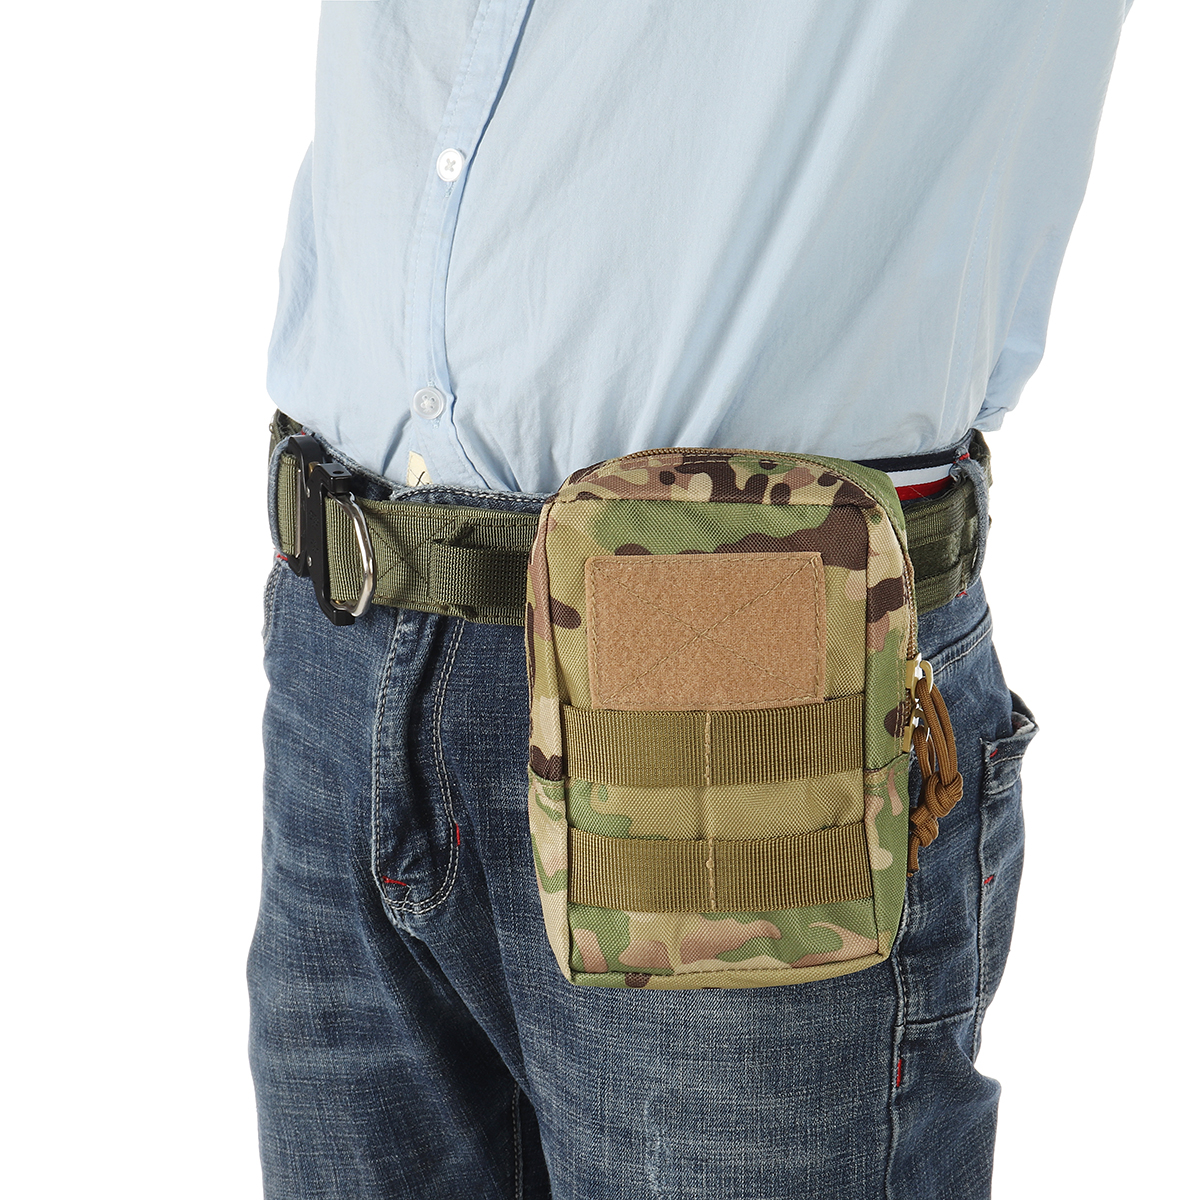 Military-Tactical-Camo-Belt-Pouch-Bag-Pack-Phone-Bags-Molle-Pouch-Camping-Waist-Pocket-Bag-Phone-Cas-1777605-10